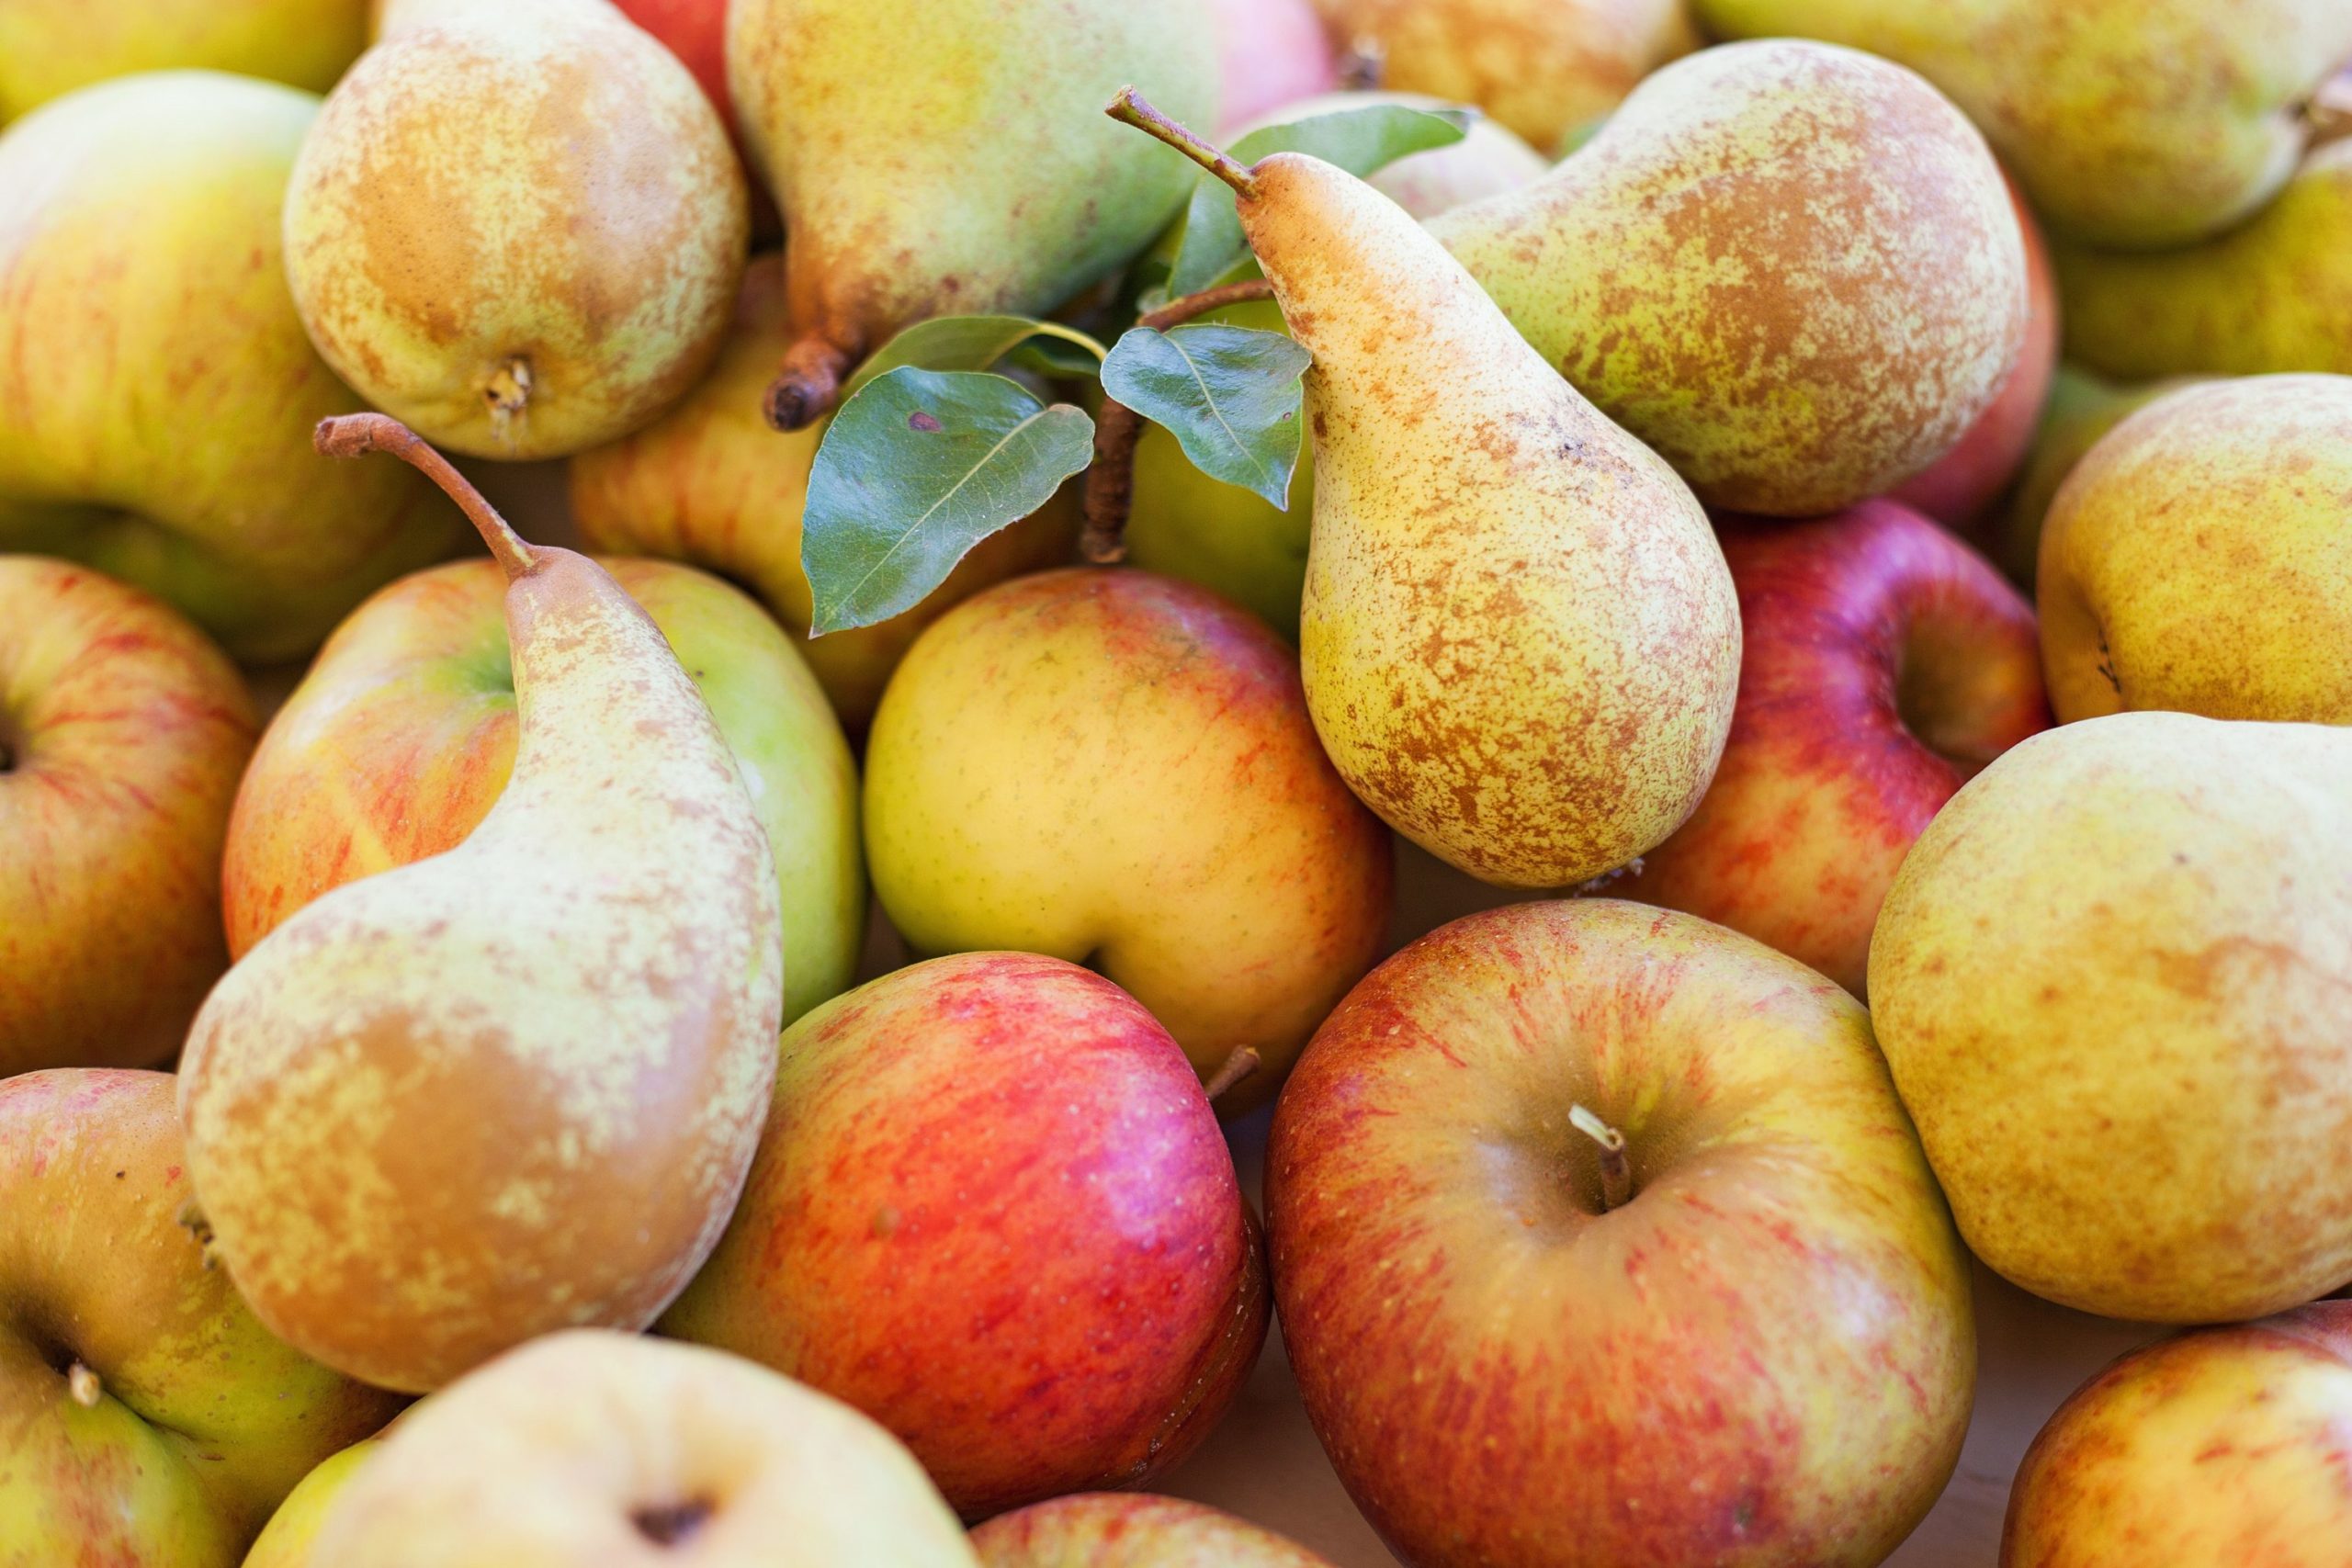 FieldSpec4 used in Australian study on apple and pear production